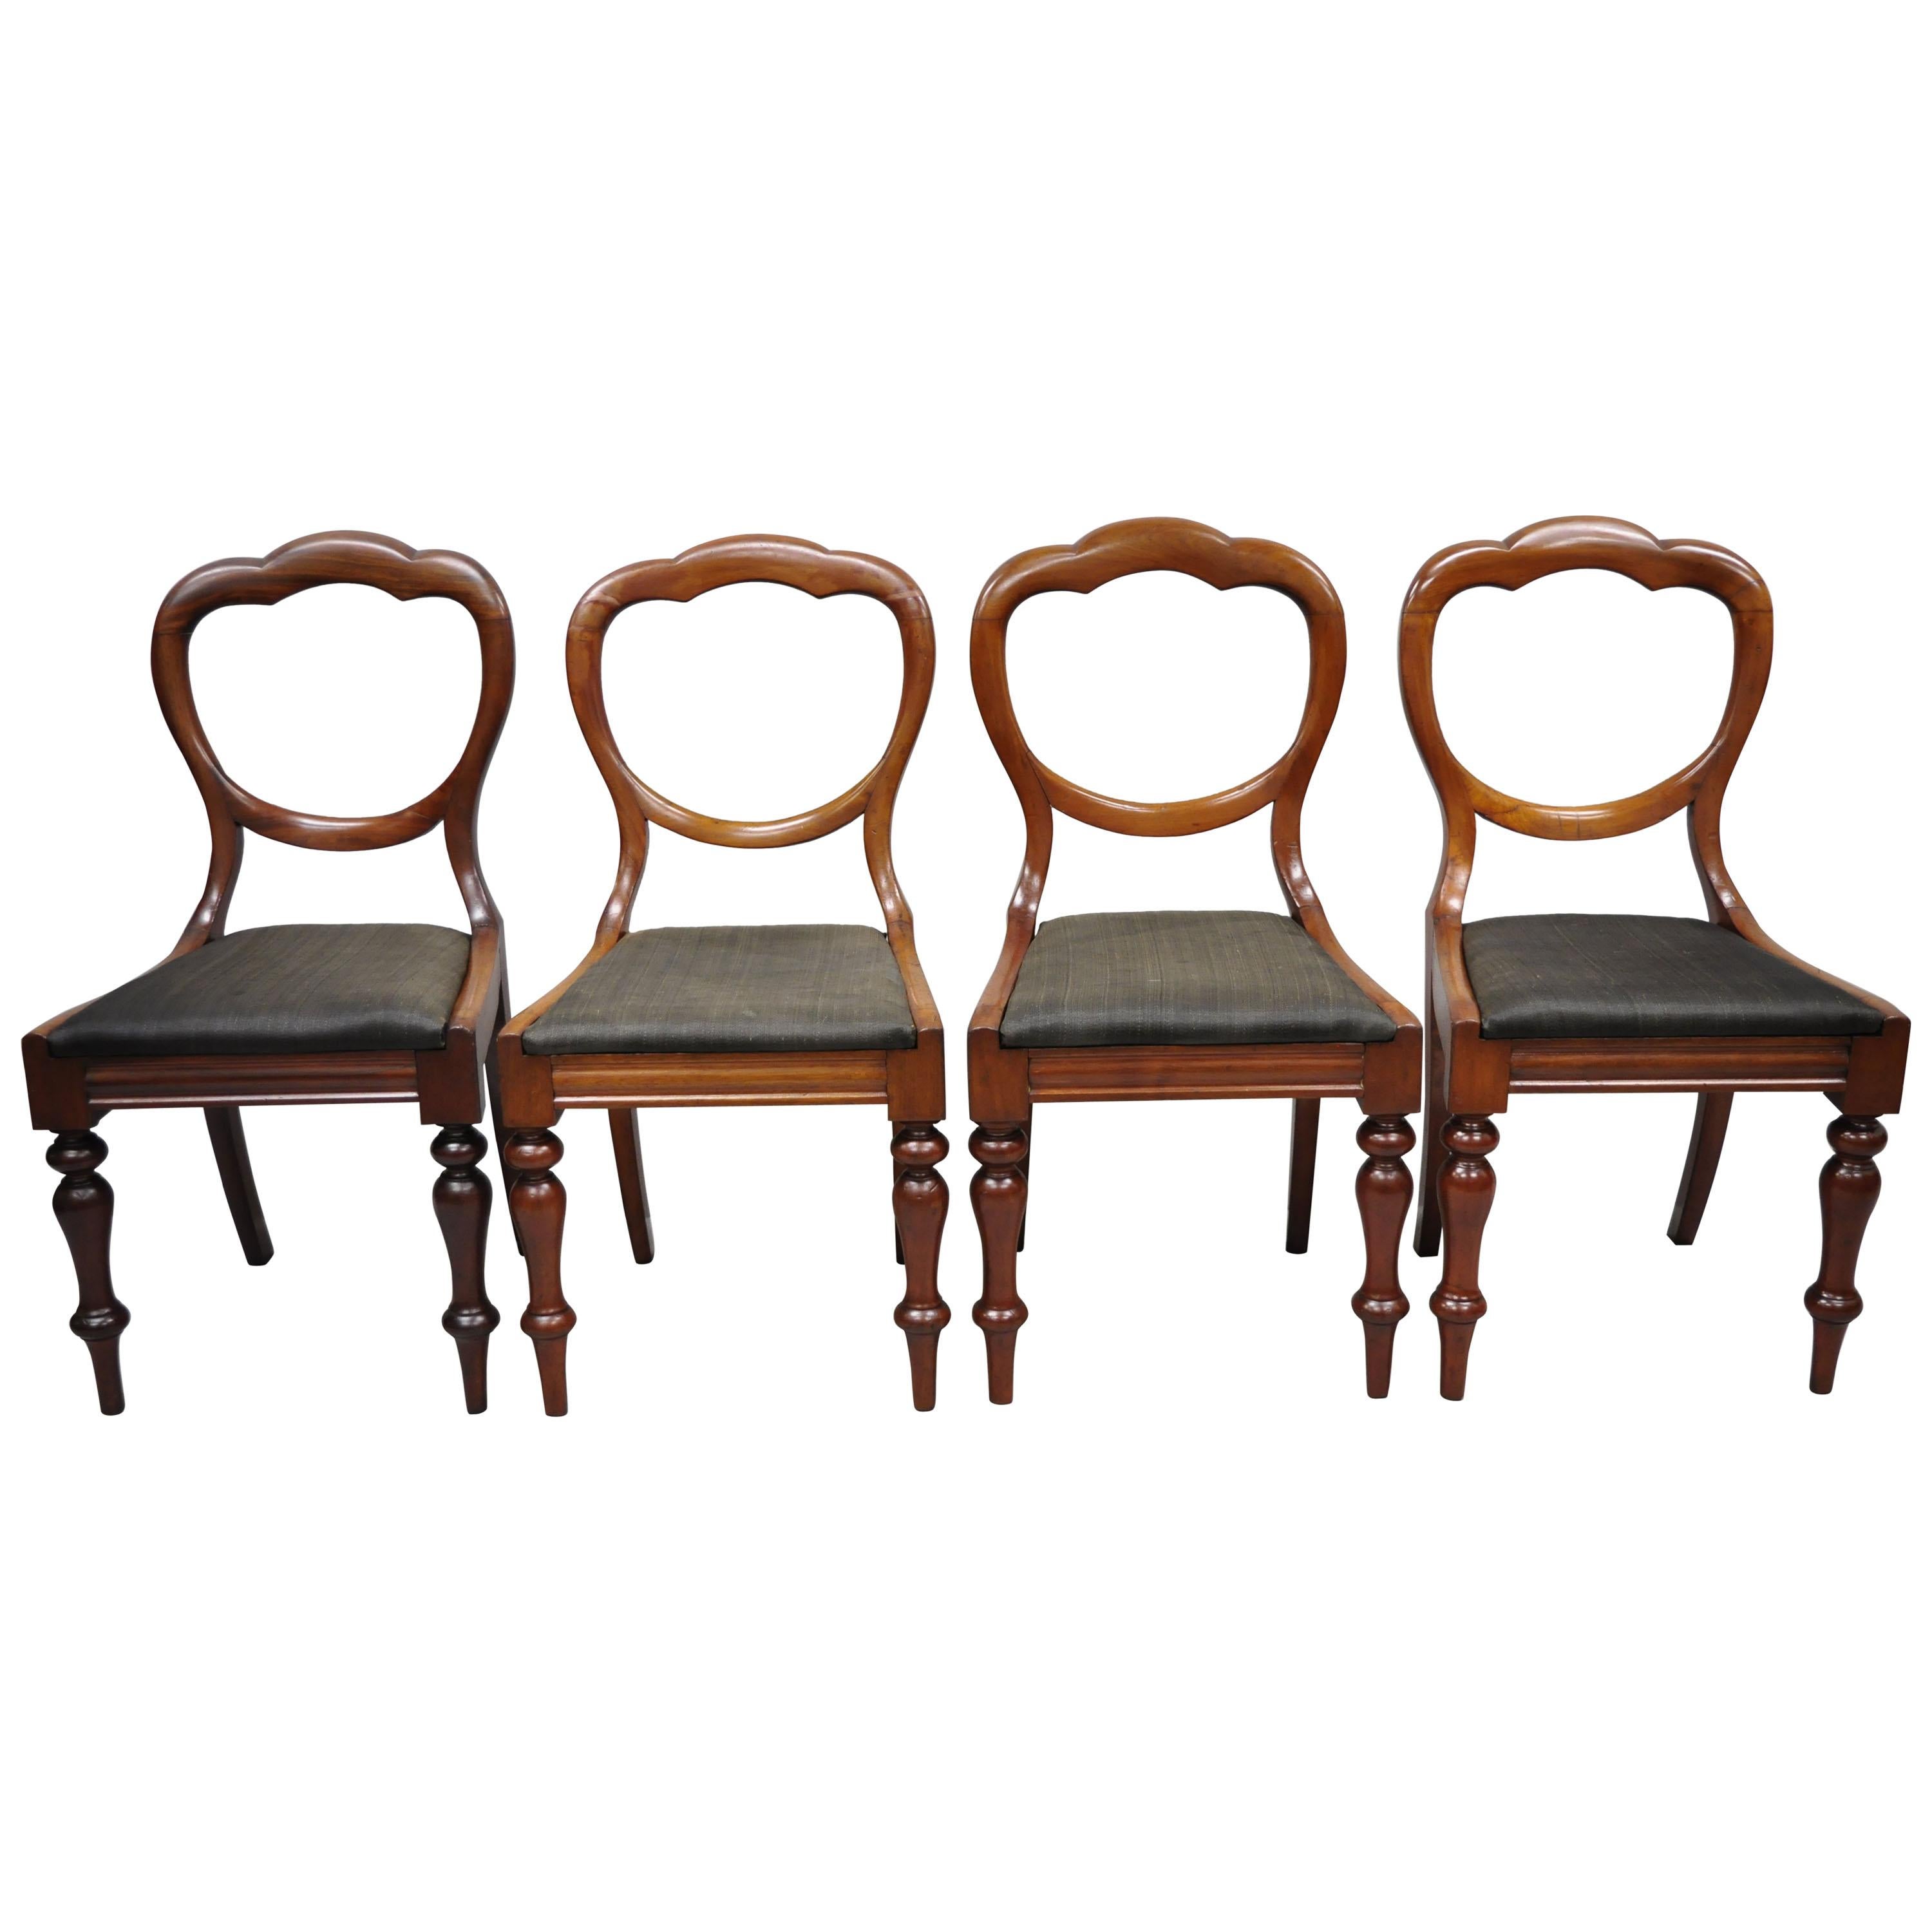 Antique 19th Century English Victorian Balloon Back Mahogany Library Side Chairs